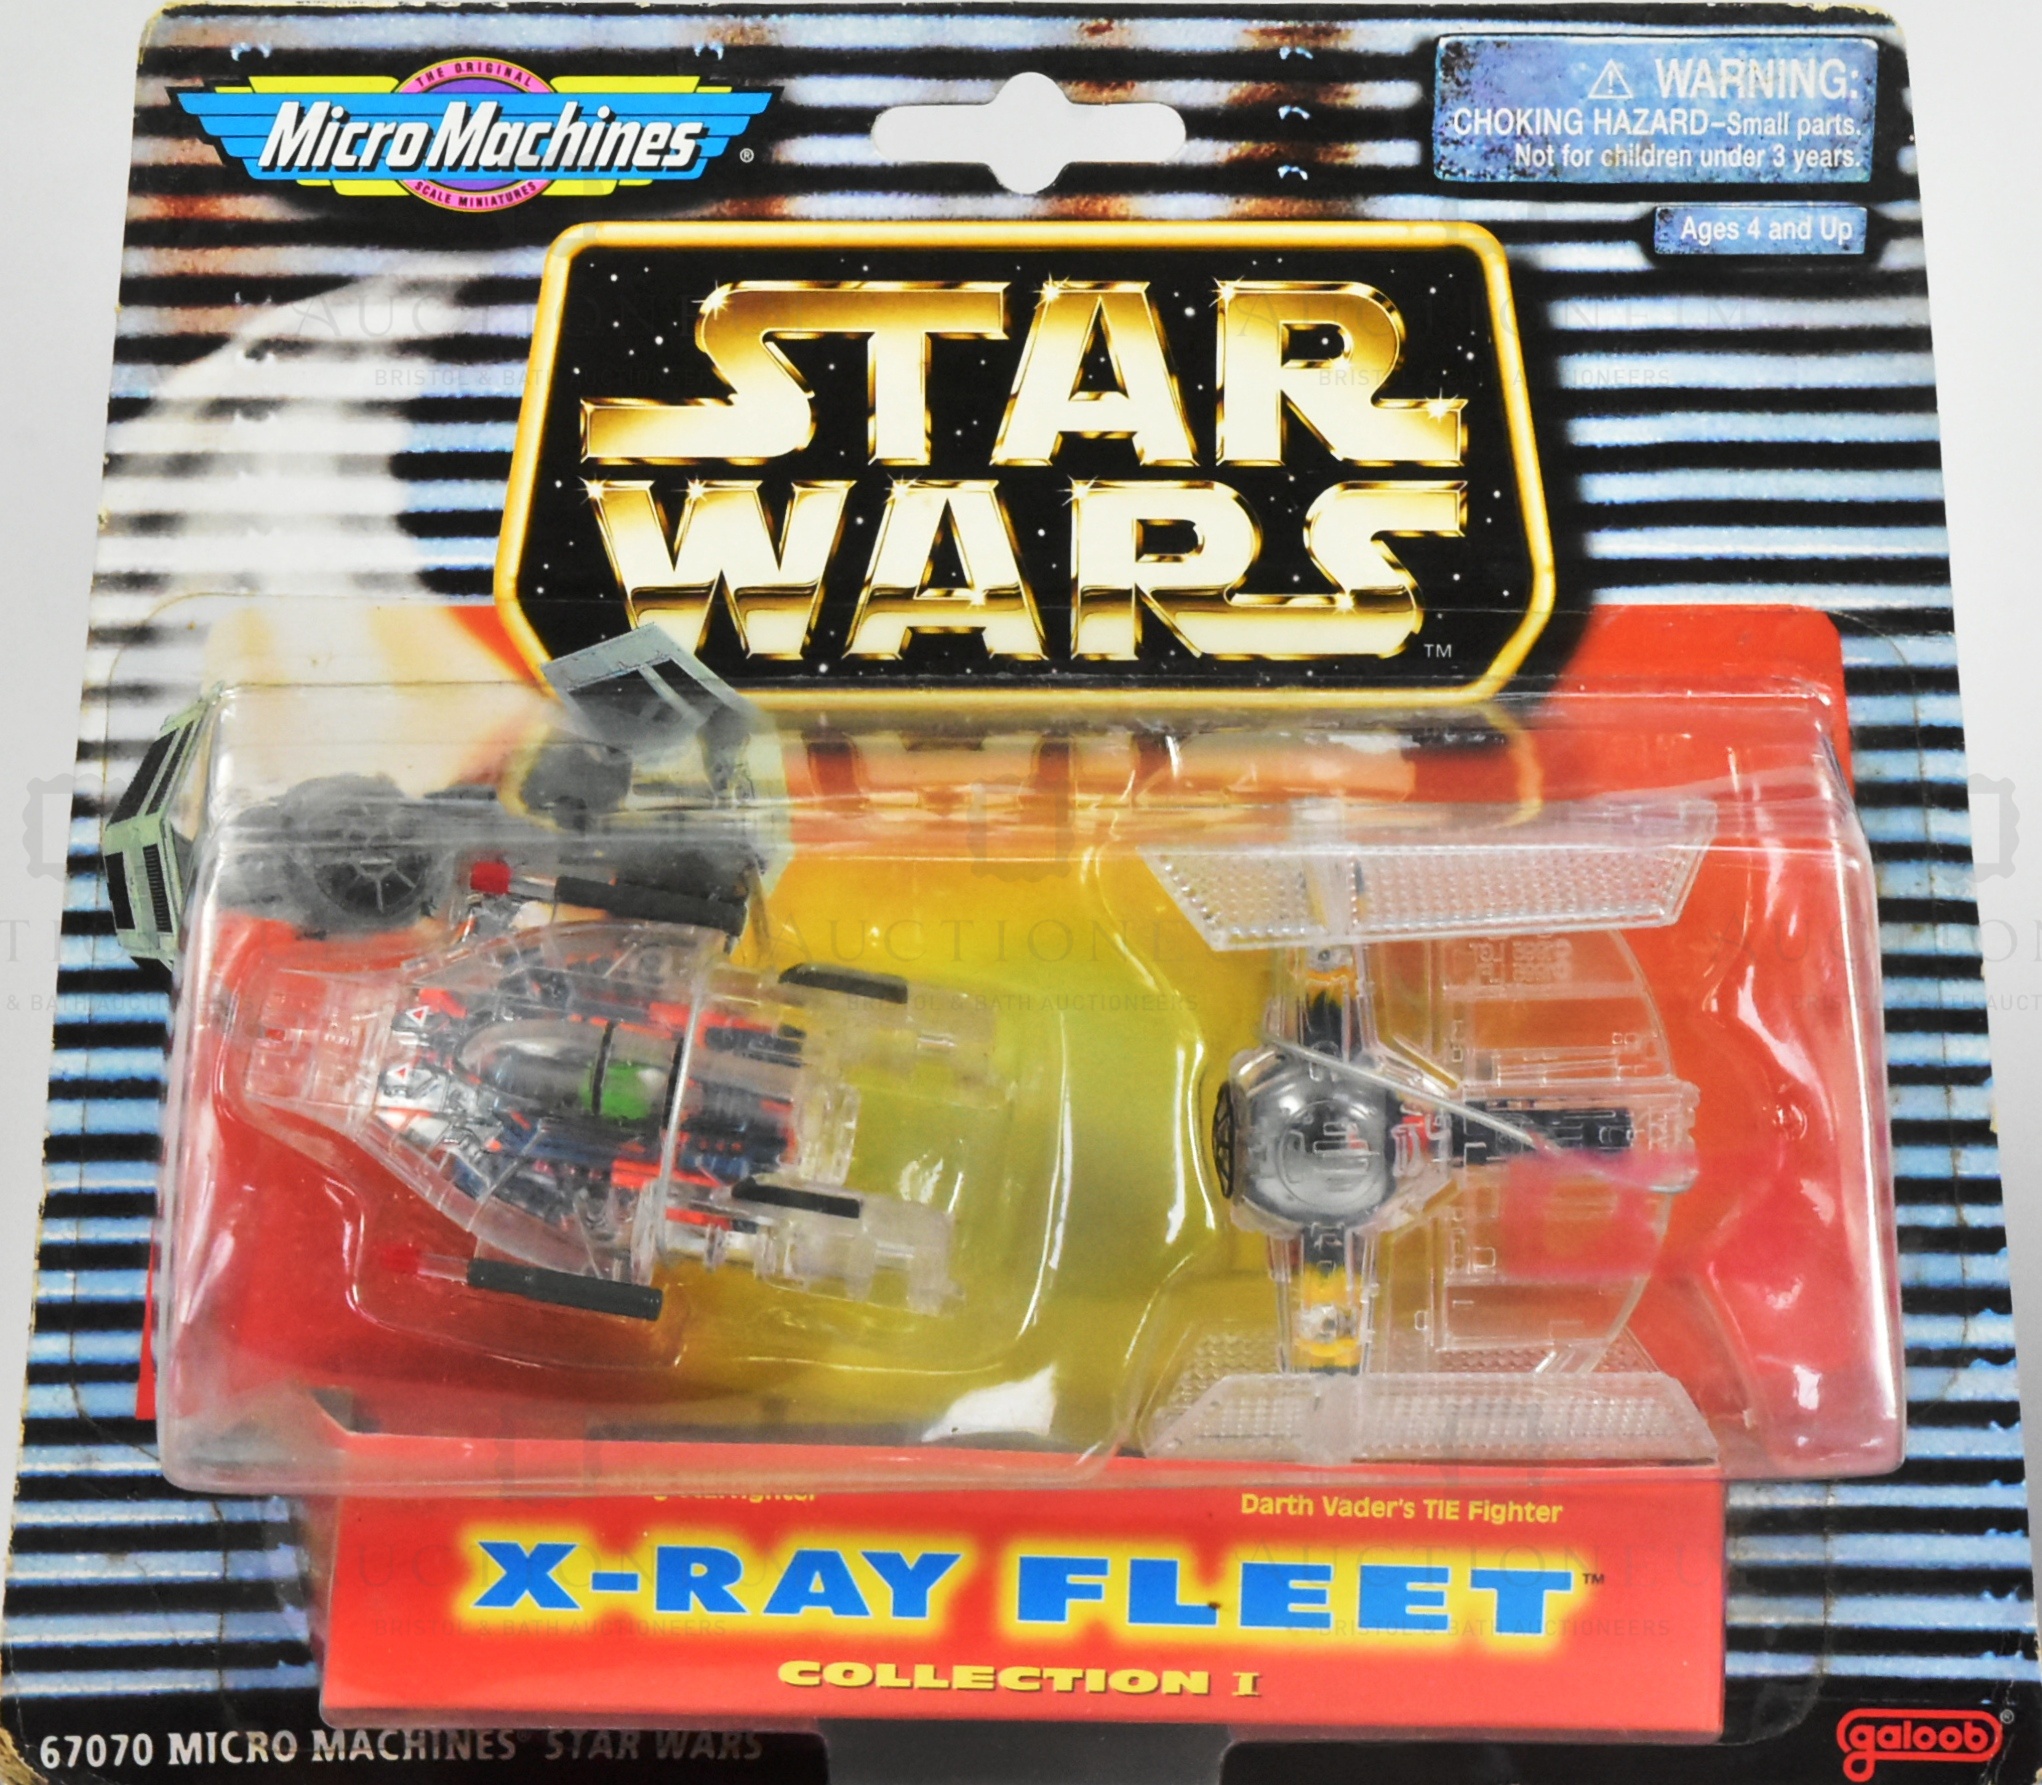 STAR WARS - MICROMACHINES - COLLECTION OF PLAYSETS - Image 3 of 5